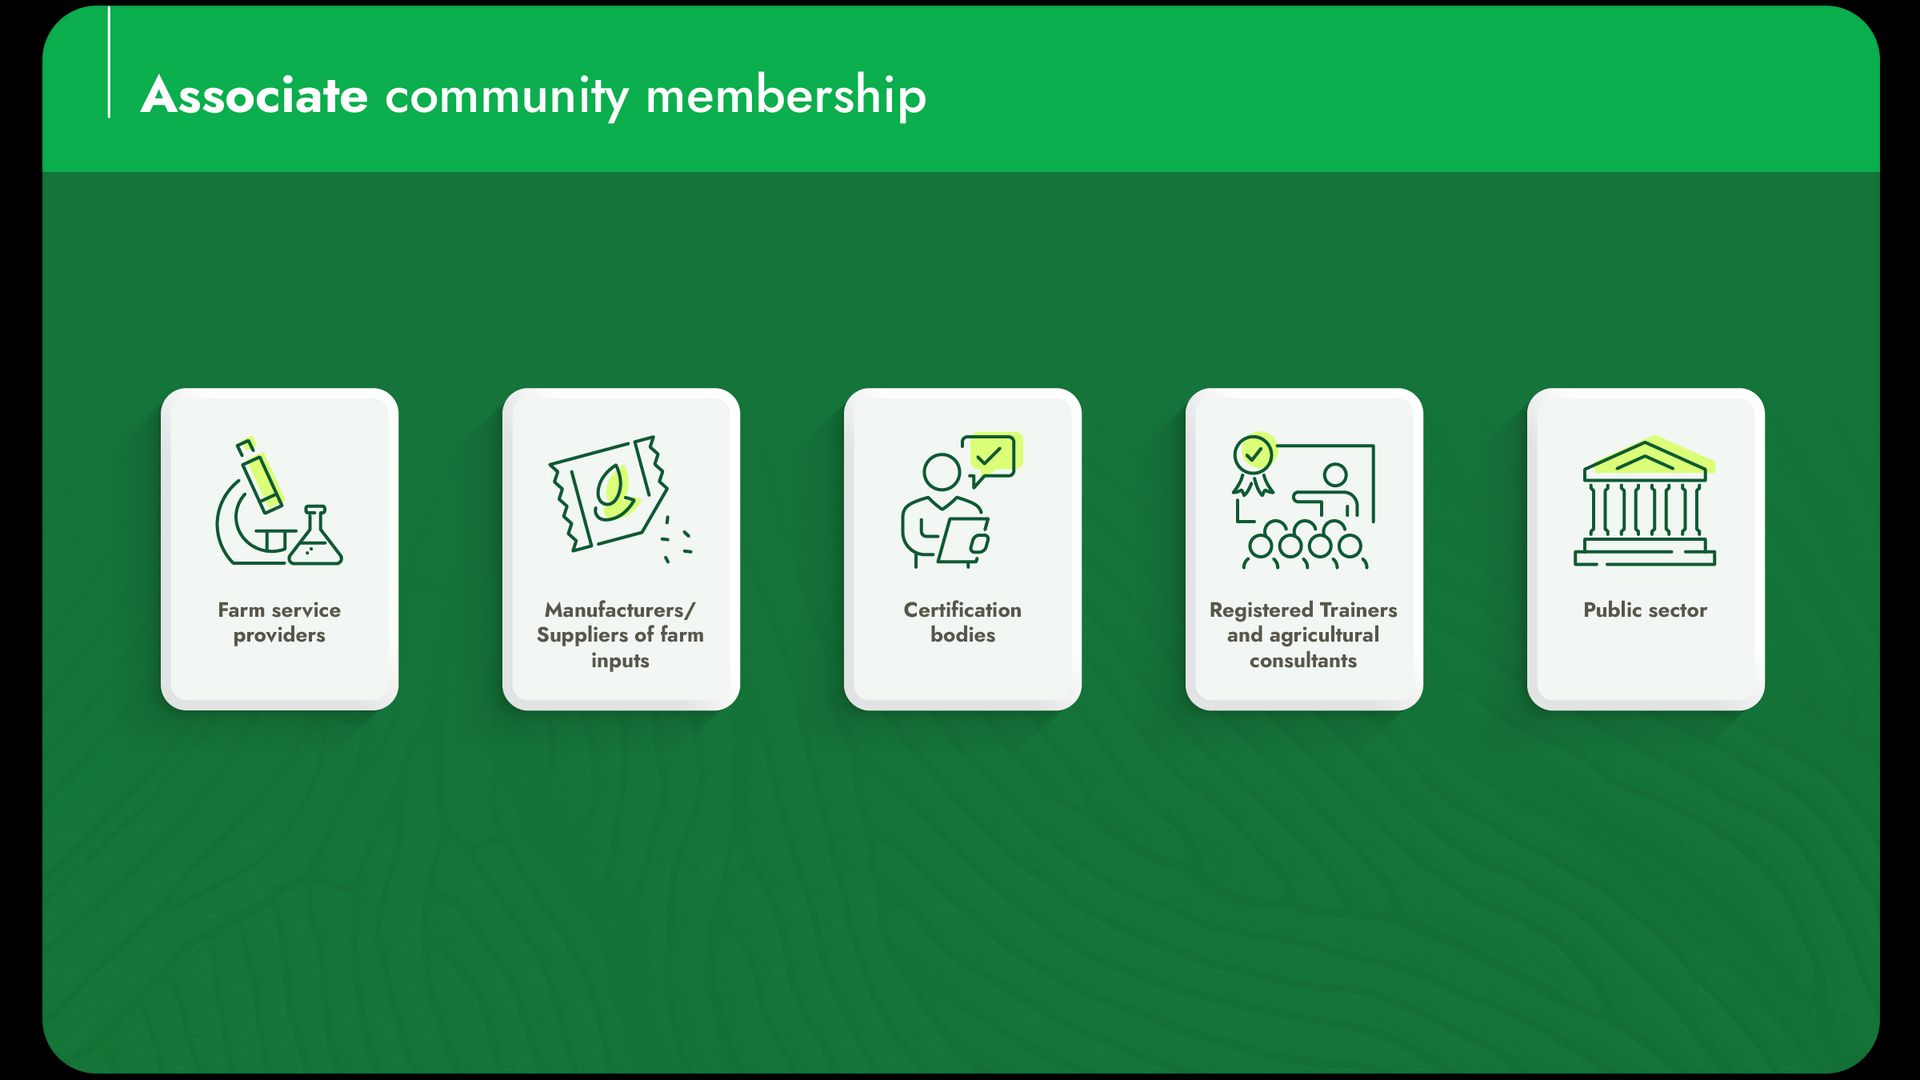 Associate community membership is for farm service providers, manufacturers/suppliers of farm inputs, certification bodies, Registered Trainers, agricultural consultants and public sector.